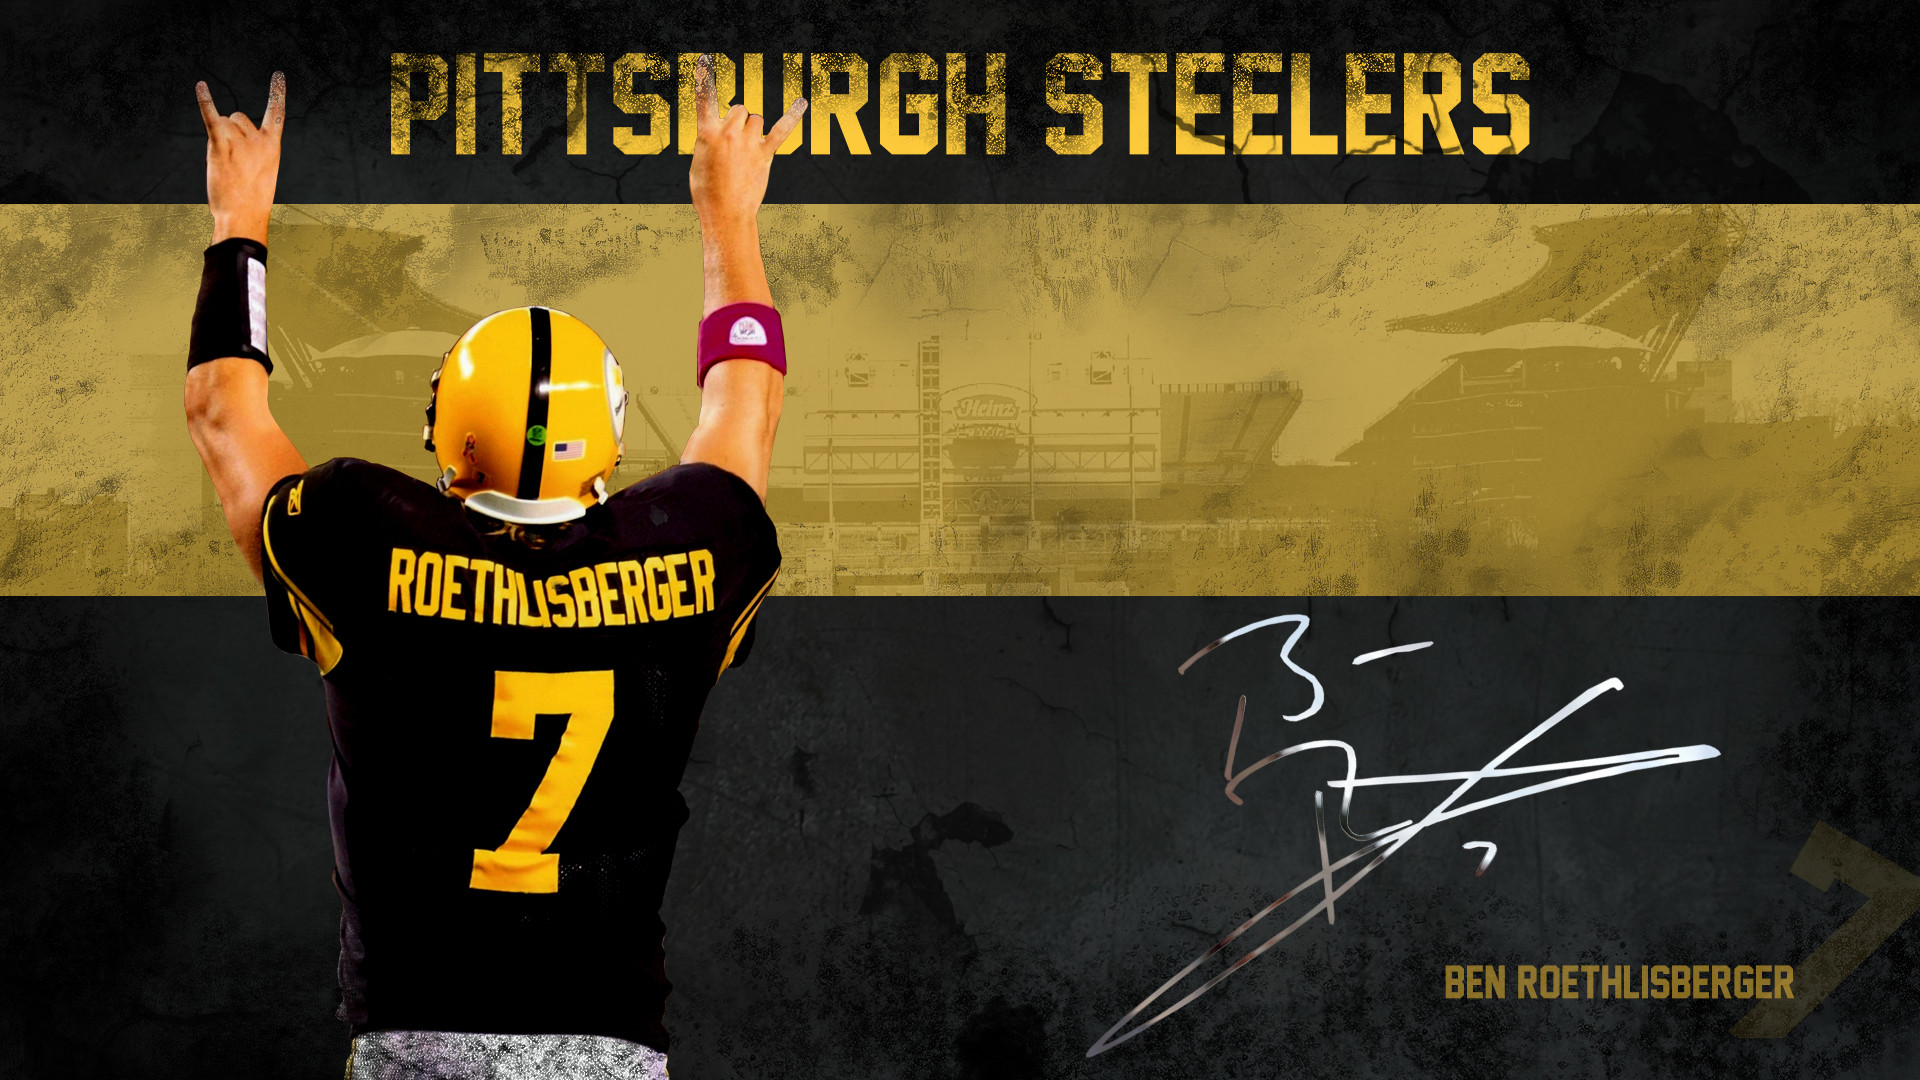 1920x1080 Pittsburgh Steelers images Ben Roethlisberger Wallpaper HD wallpaper and  background photos